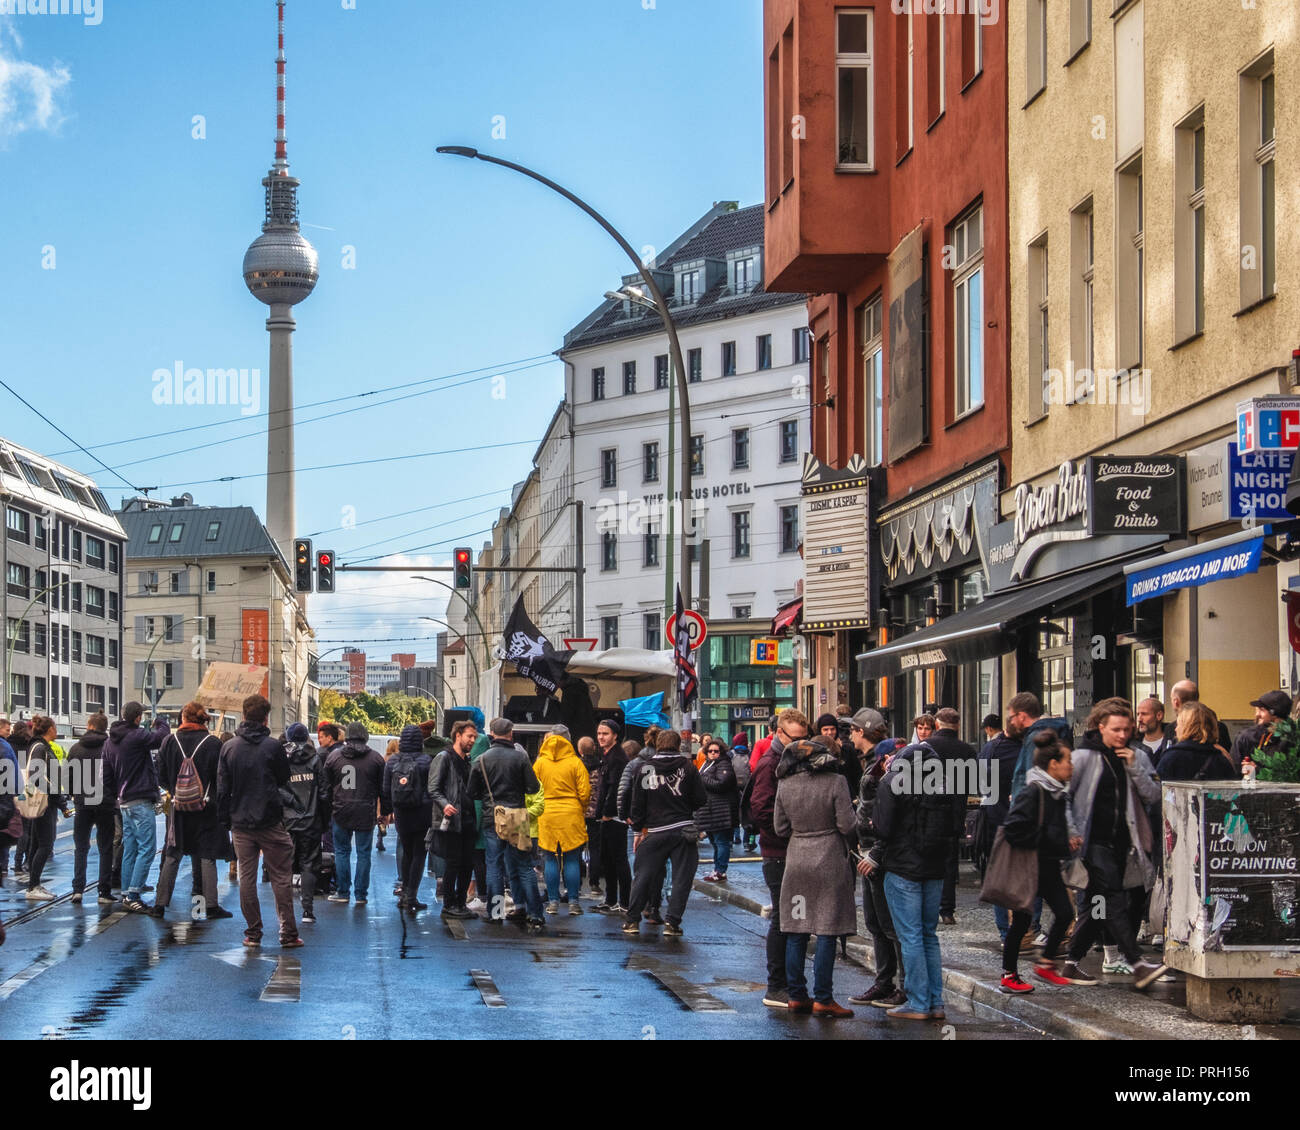 Berlin, Mitte, Germany 3 October 2018. Club scene activists protest against a planned right-wing extremist demonstration on the German Day of Unity. The protesters gathered at Rosenthaler Platz to stage a stationery rave under the slogan ‘Dance against the Right’ (Tanzen gegen Rechts) The protest was planned to counter the  planned right-wing extremist organization ‘Wir für Deutschland (WFD)’ march from Hauptbahnhof through the centre of Berlin using the slogan ‘Day of the Nation’ Credit: Eden Breitz/Alamy Live News Stock Photo